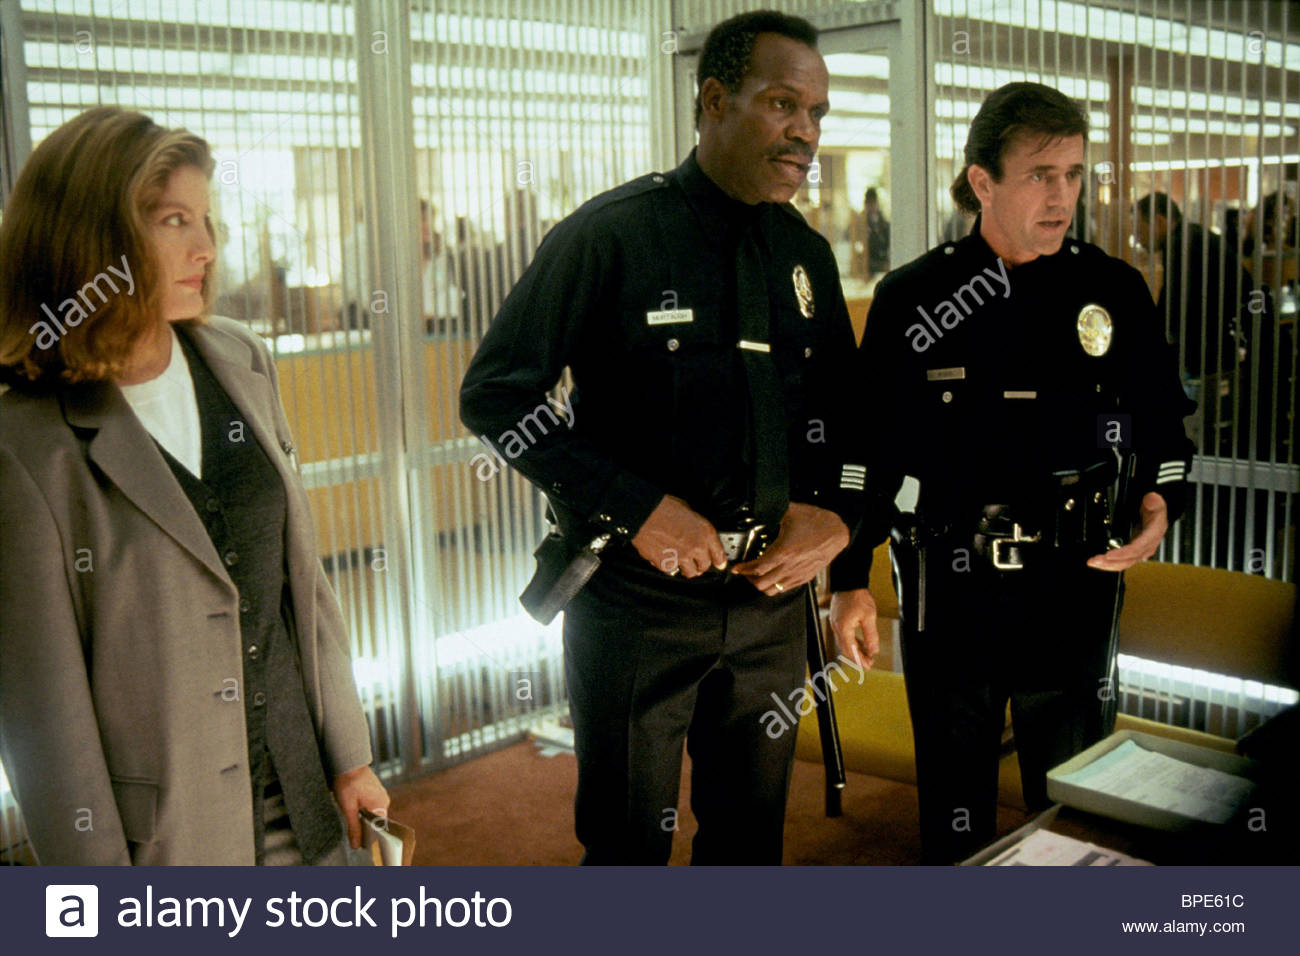 HQ Lethal Weapon 3 Wallpapers | File 173.79Kb